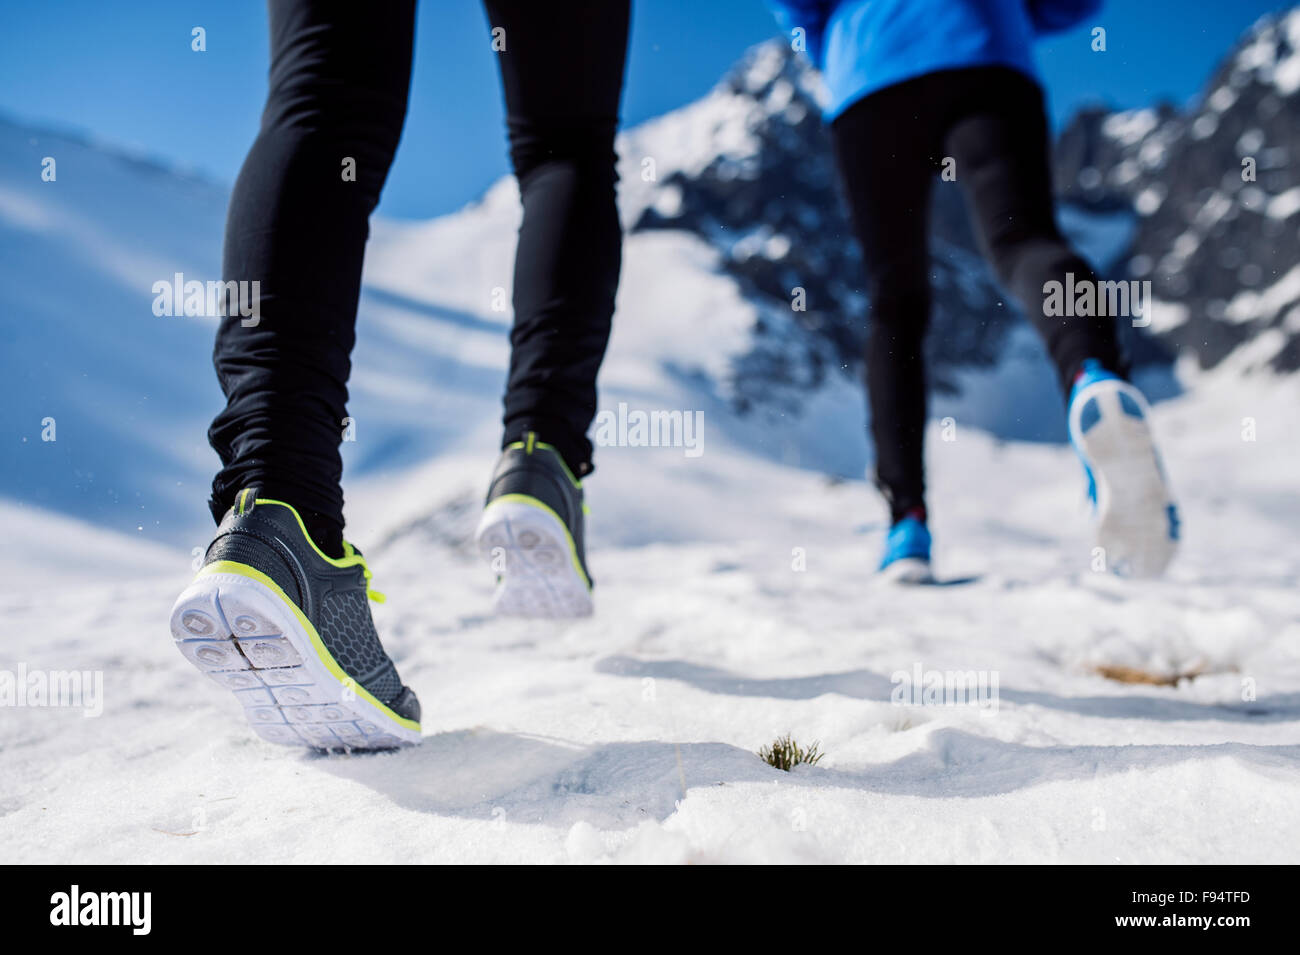 Legs of two runners outside in winter nature Stock Photo